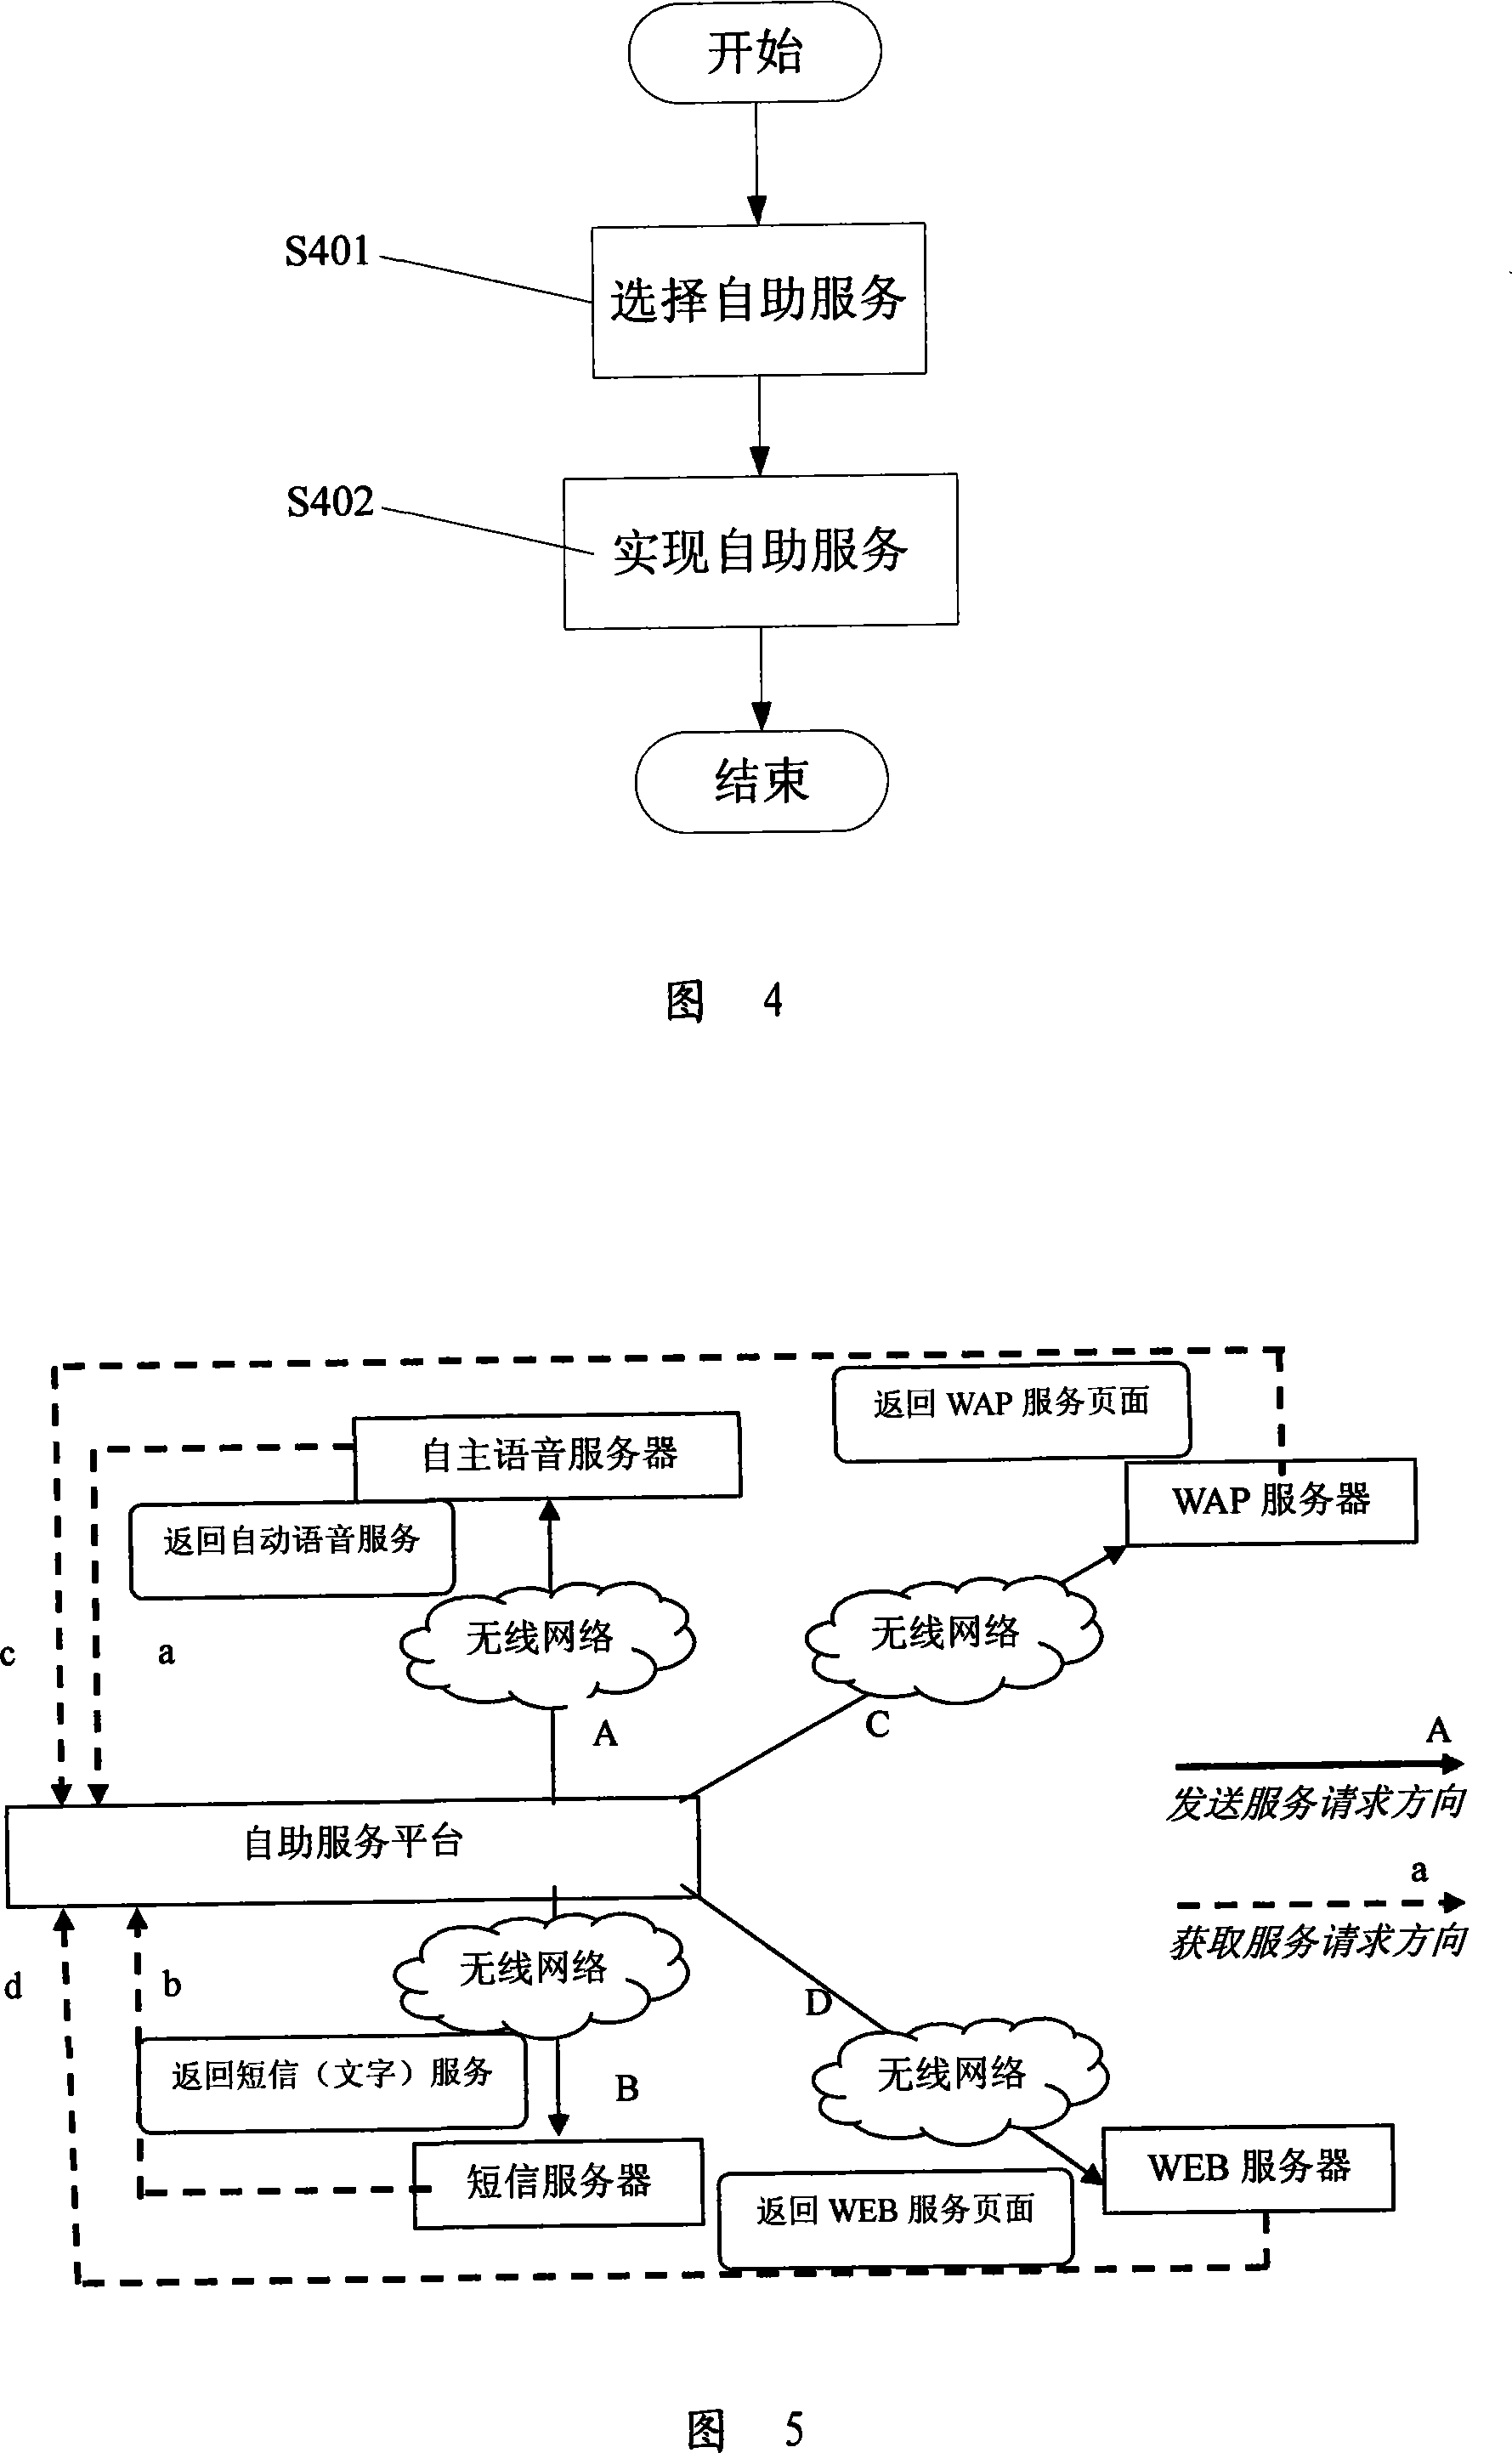 Method of implementing self-help service and self-help service platform